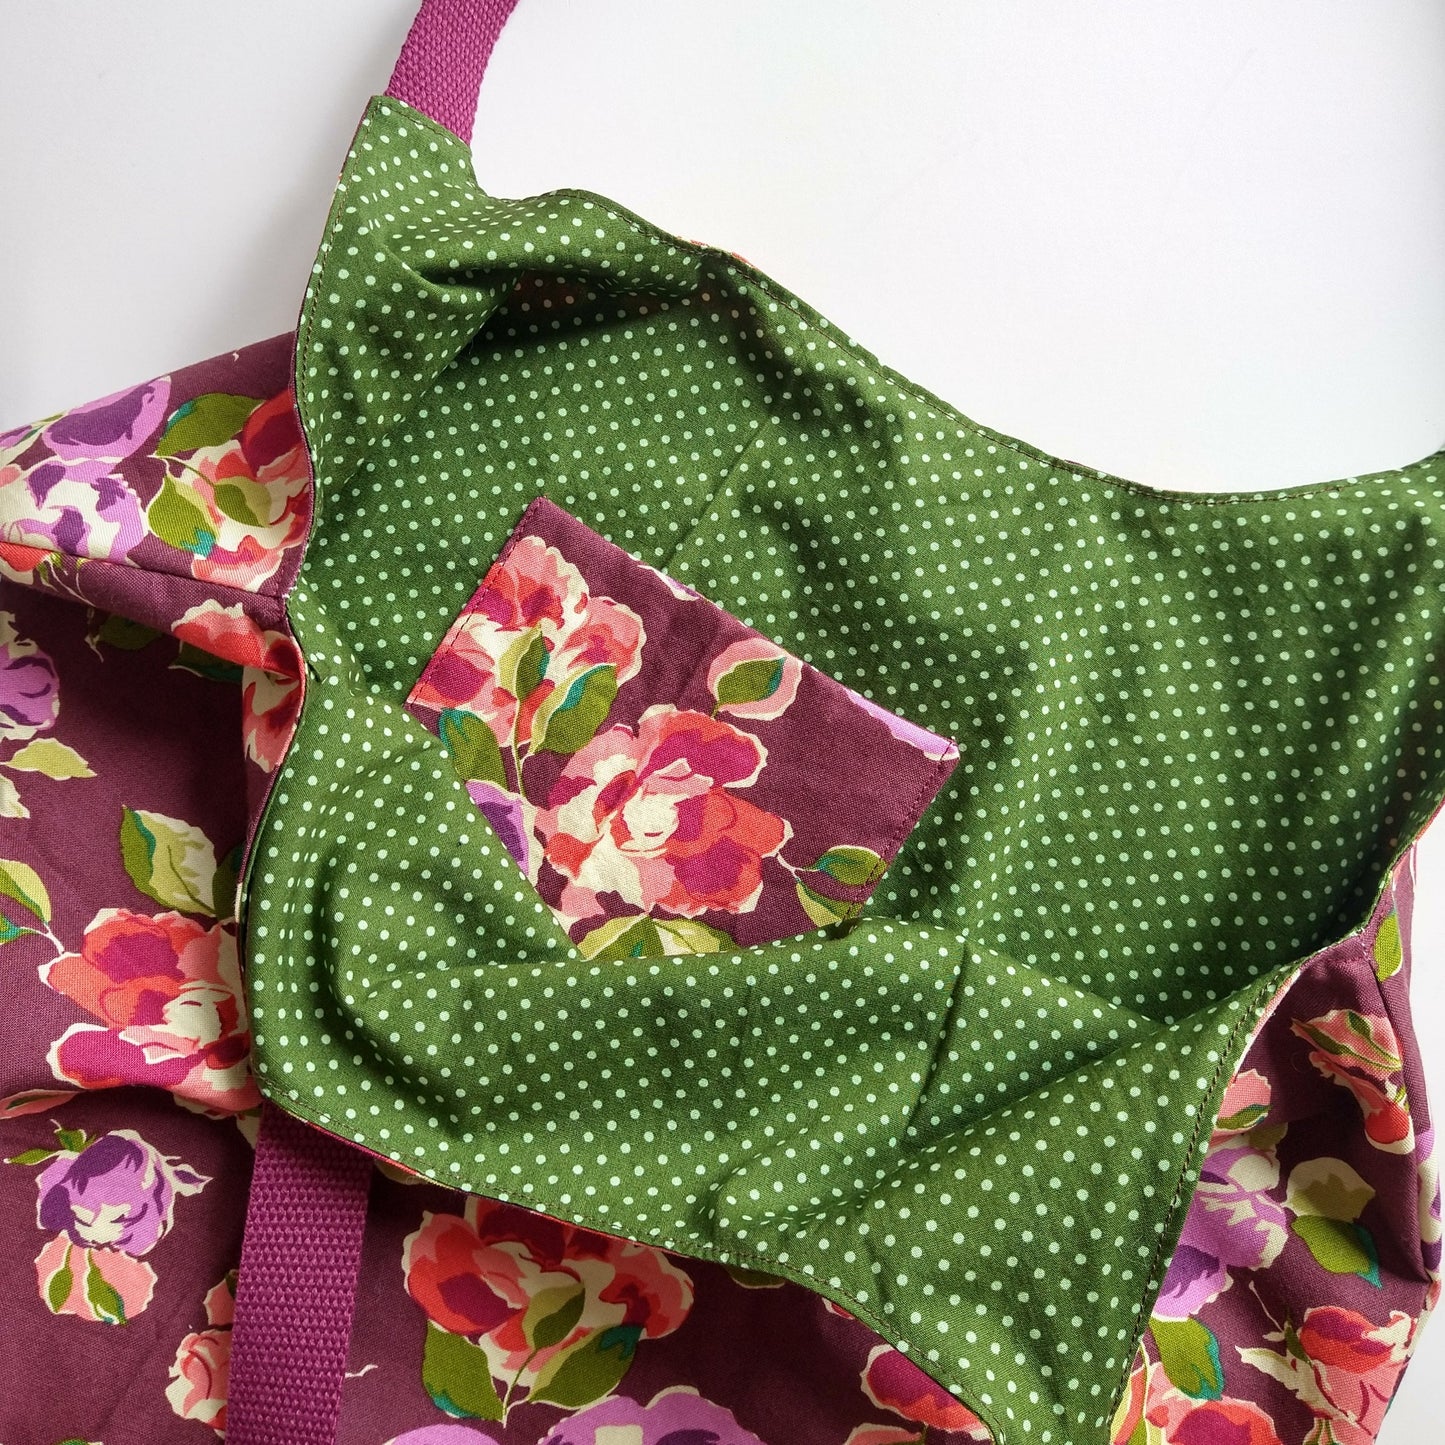 Shopping bag, reversible, size small, bordeaux flowers (Handmade in Canada)